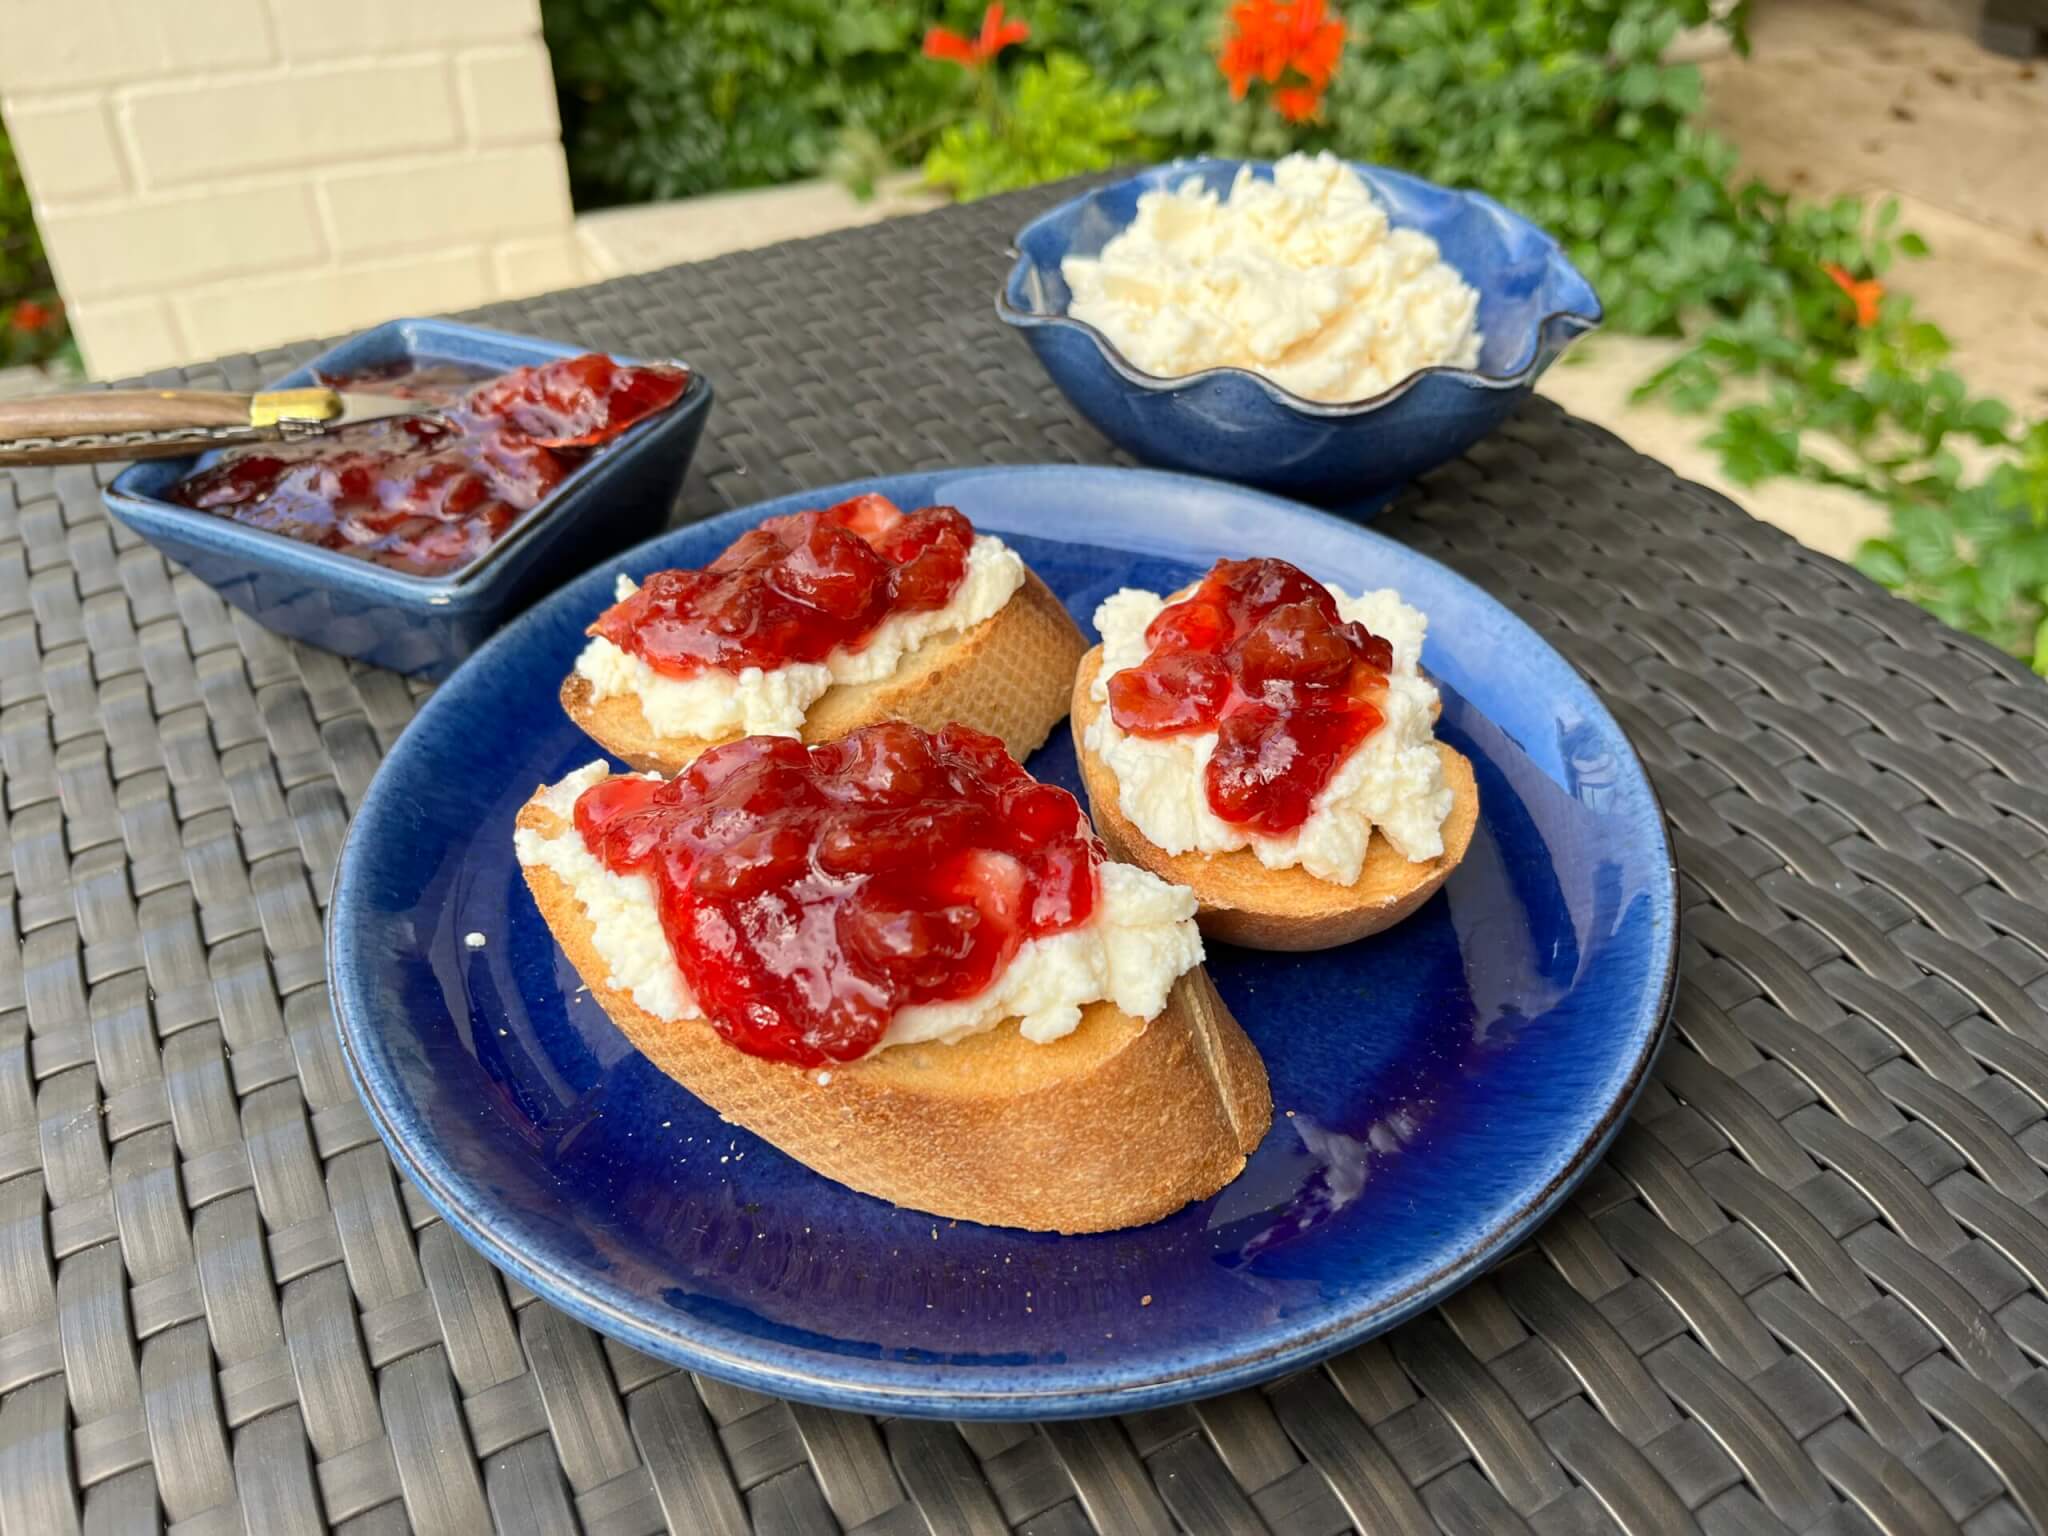 New Canaan Farms Cherry Preserves with ricotta cheese on toasted French bread